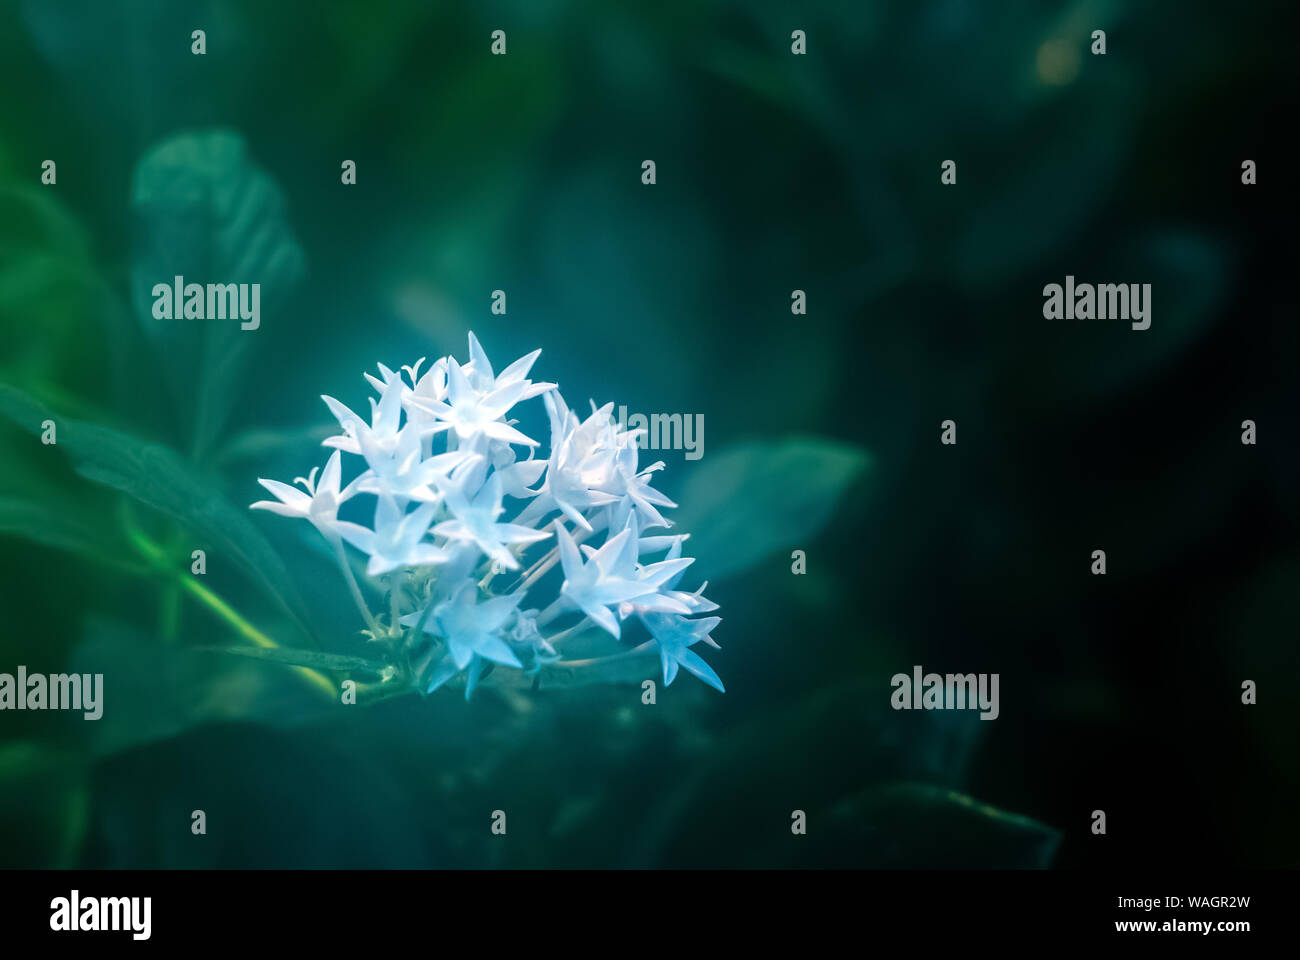 green blurred misty floral background with white glowing flowers in the foreground Stock Photo